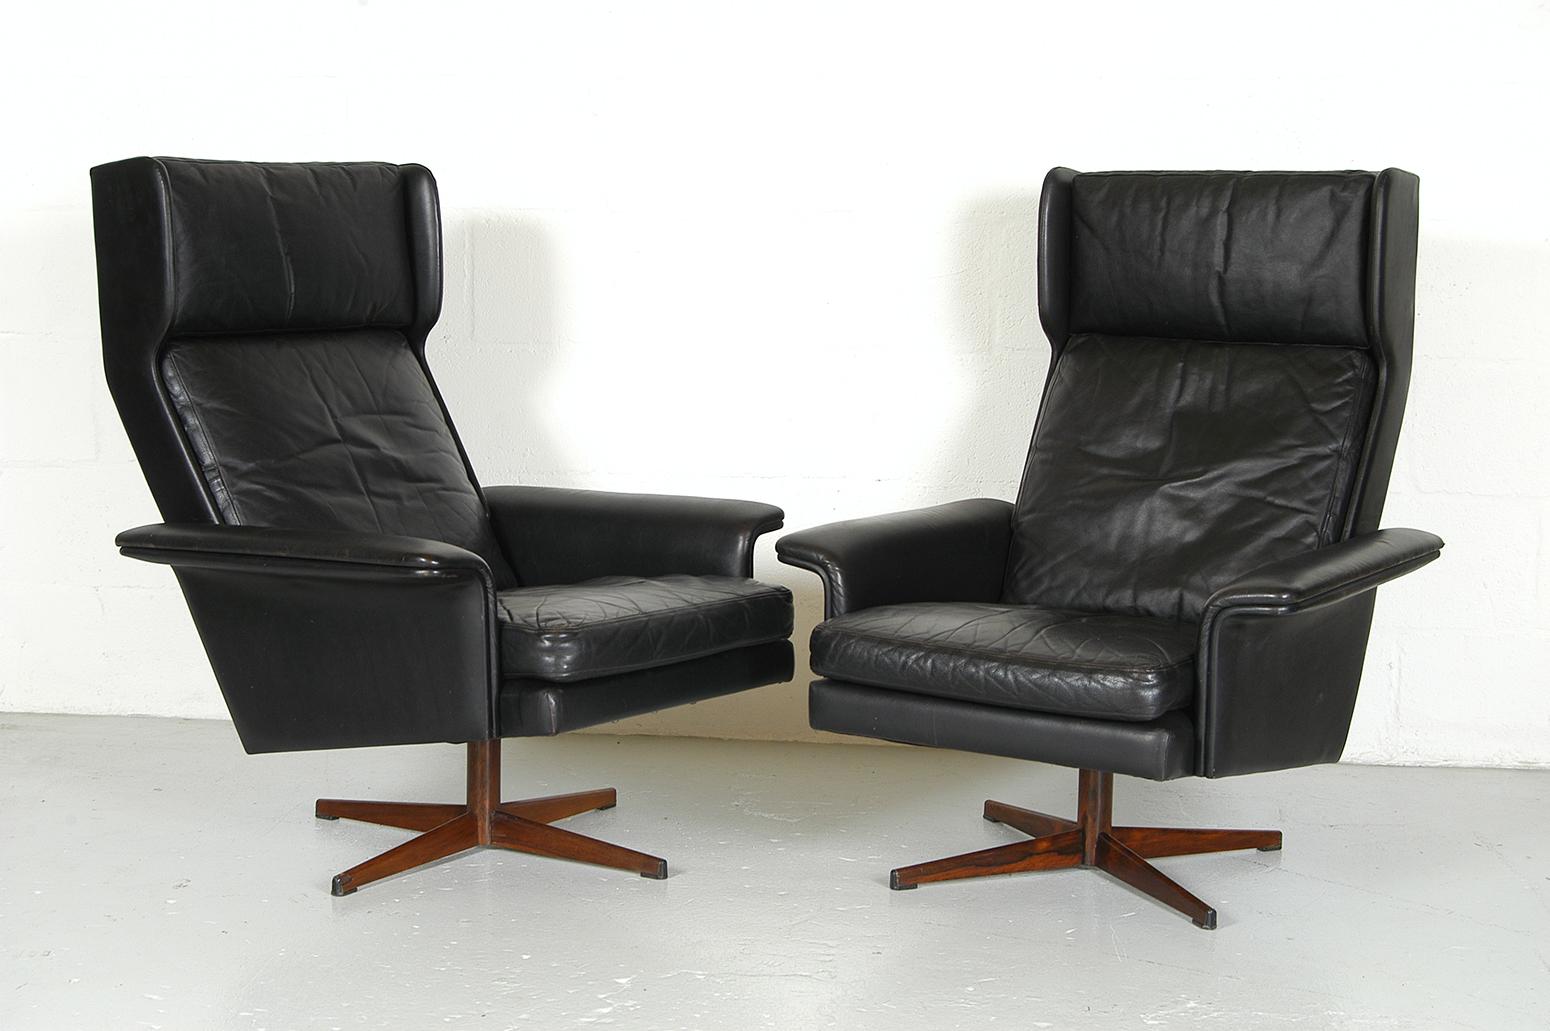 A superb pair of 1960s leather high-back lounge chairs by Komfort Denmark, designed by HW Klein. 
The leather is in beautiful original condition, soft supple and gently creased showing minimal signs of wear. The bases are rosewood veneered steel. 
